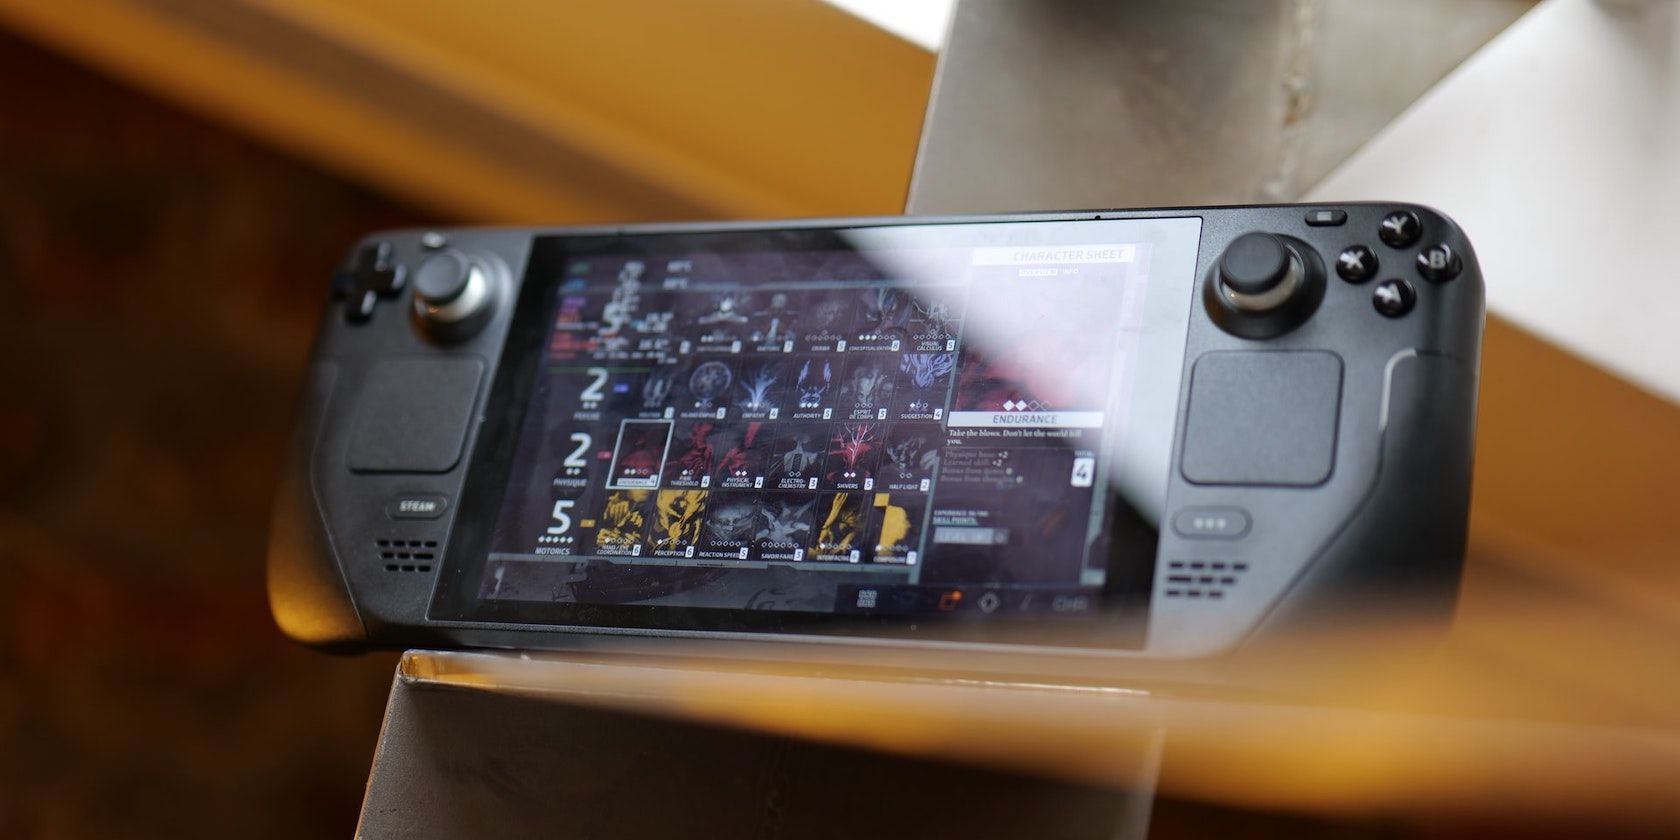 A close up image of a Steam Deck handheld console.